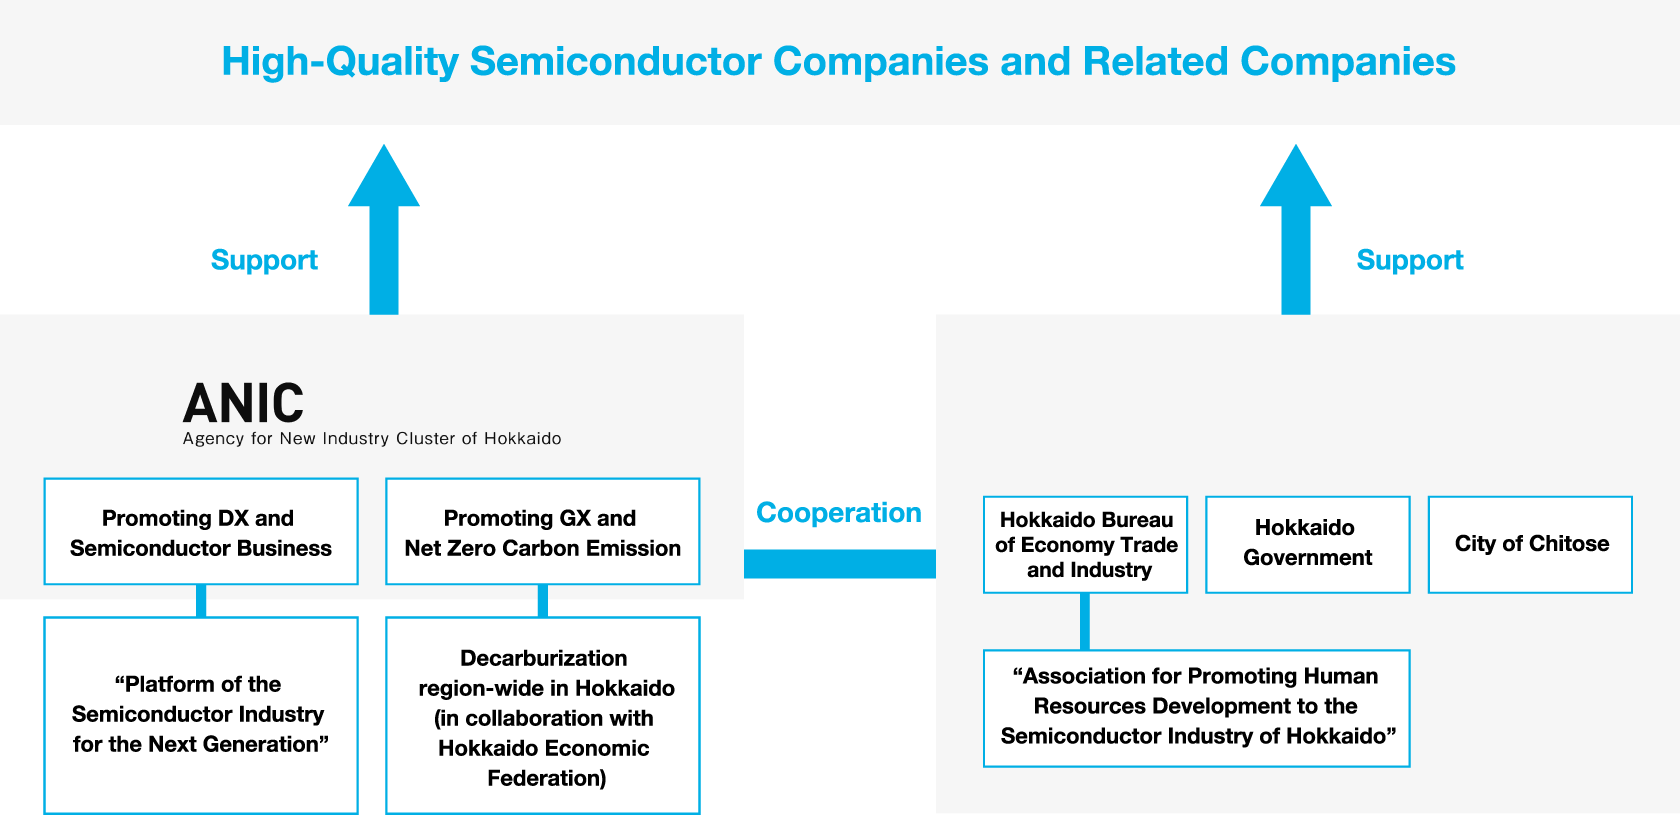 High-Quality Semicondactor Companies and Related Companies